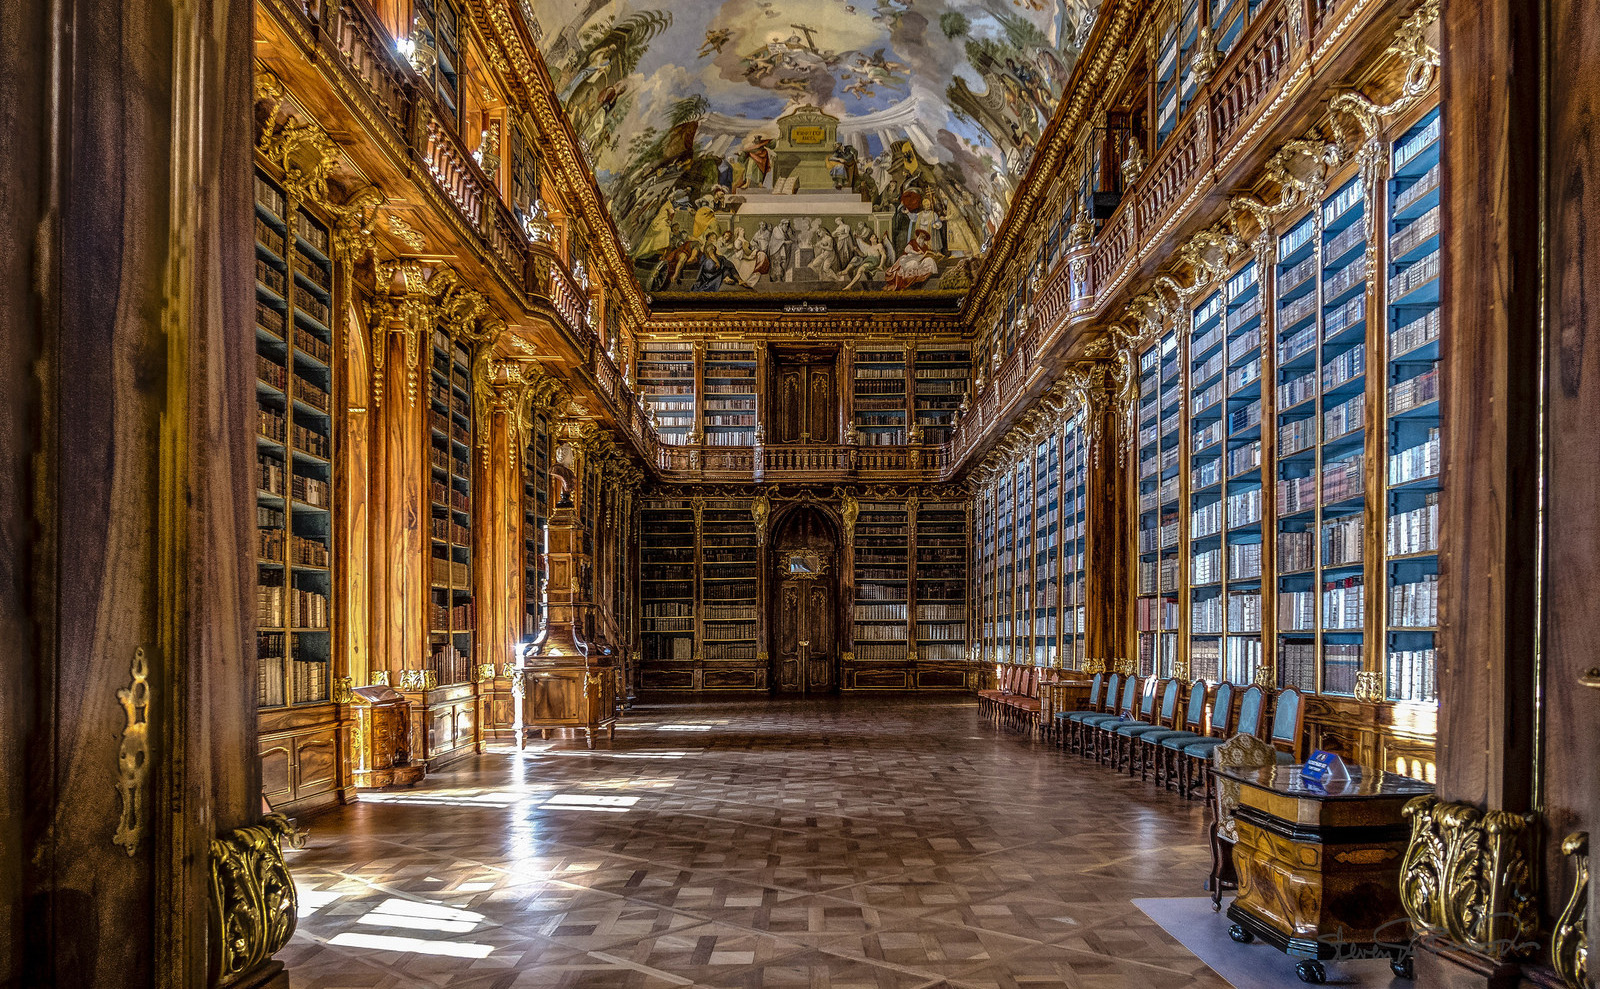 Prague's Stunning Strahov Monastery Library and Cabinet of Curiosities